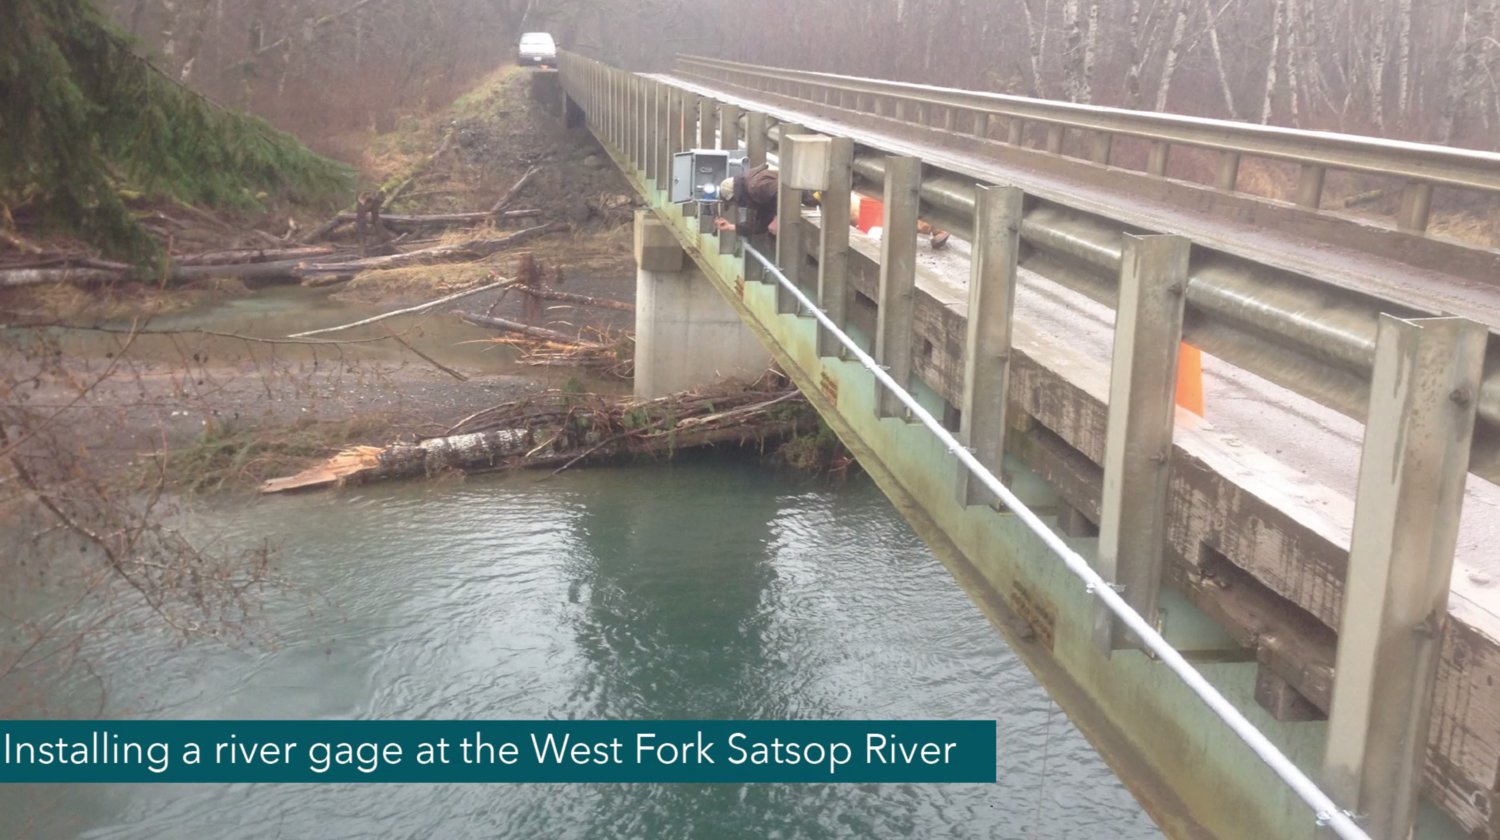 A river gage is installed at the West Fork Satsop River in this image provided by the Office of the Chehalis Basin.